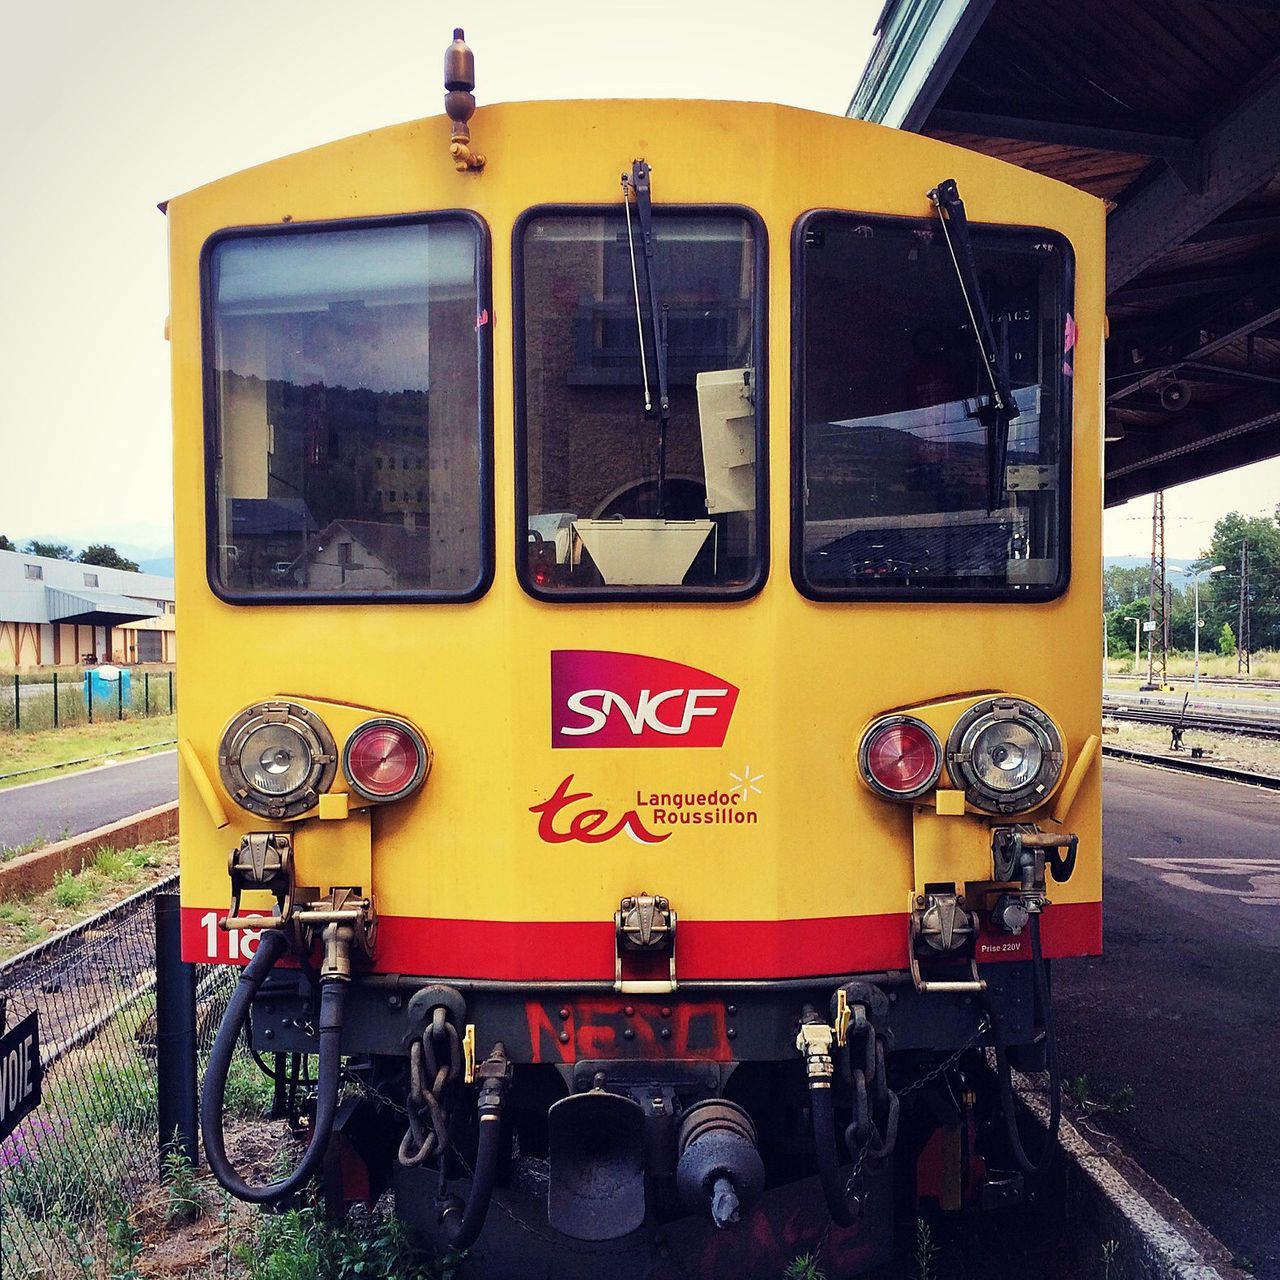 land vehicle, yellow, transportation, mode of transport, technology, car, day, metal, building exterior, built structure, machinery, retro styled, outdoors, communication, old-fashioned, architecture, stationary, travel, train - vehicle, no people